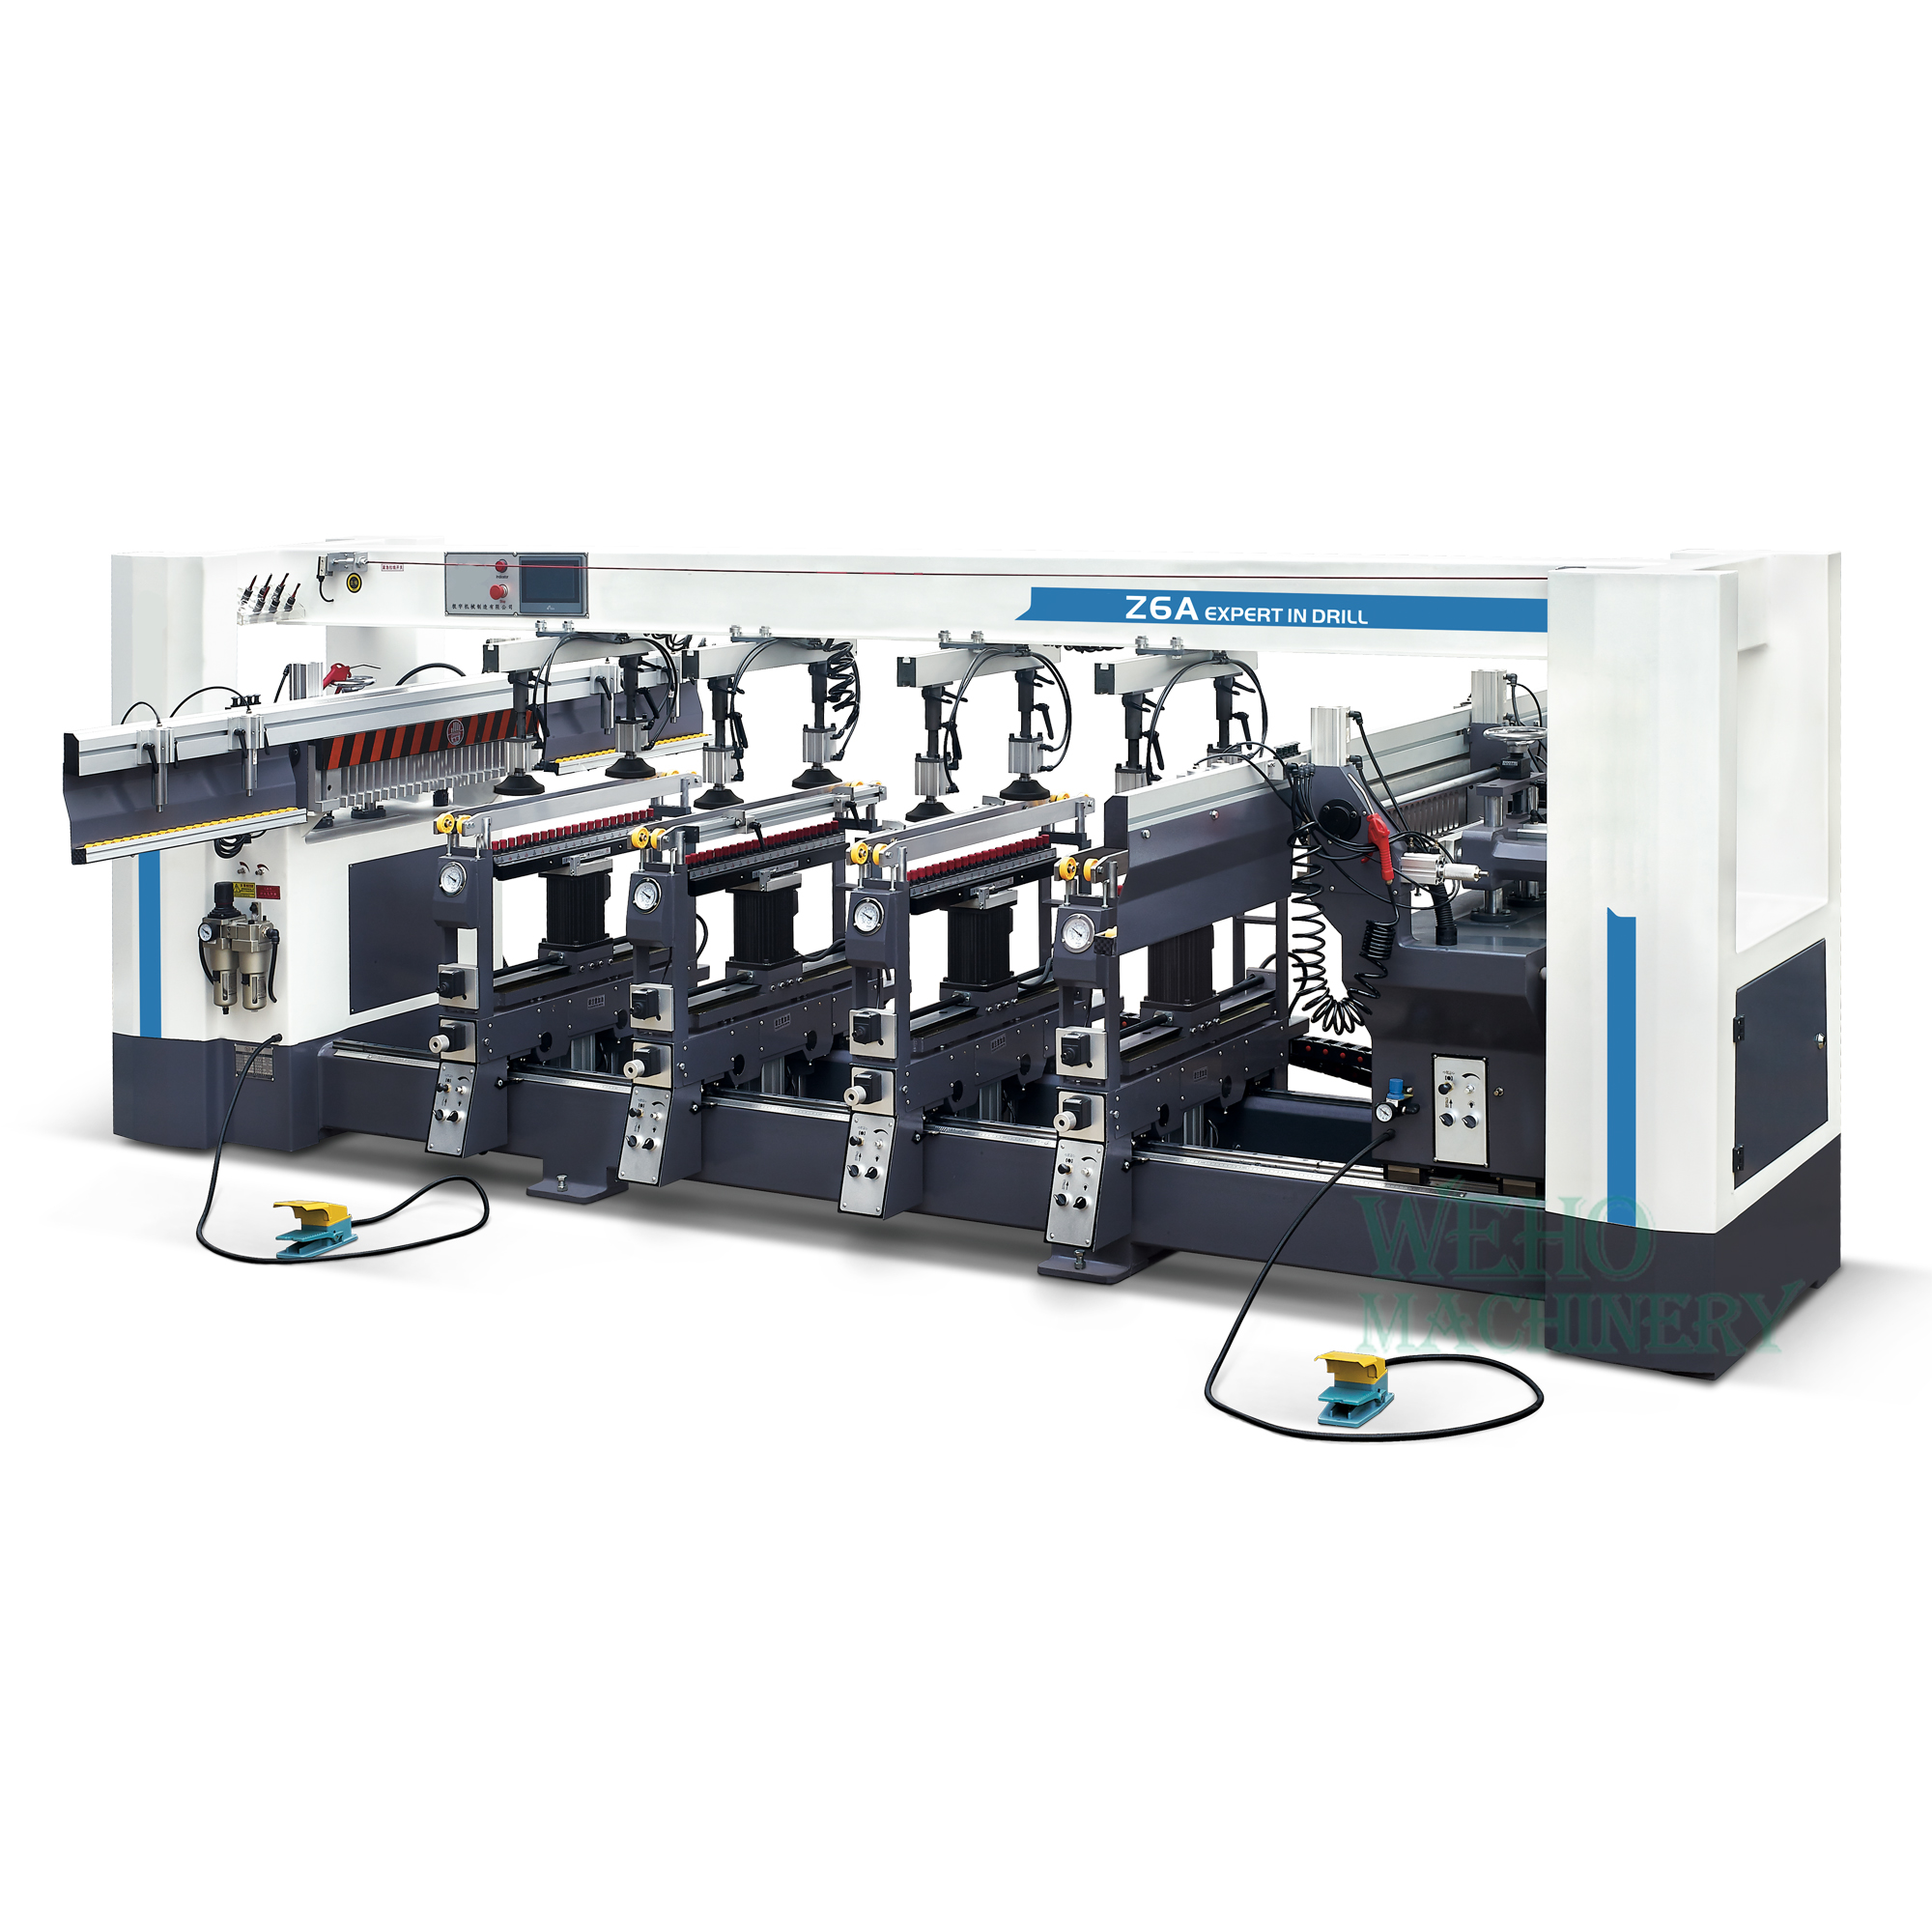 Six-row hight speed boring machine for drilling  holes in wood for sale | Machine For Drilling Holes In Wood